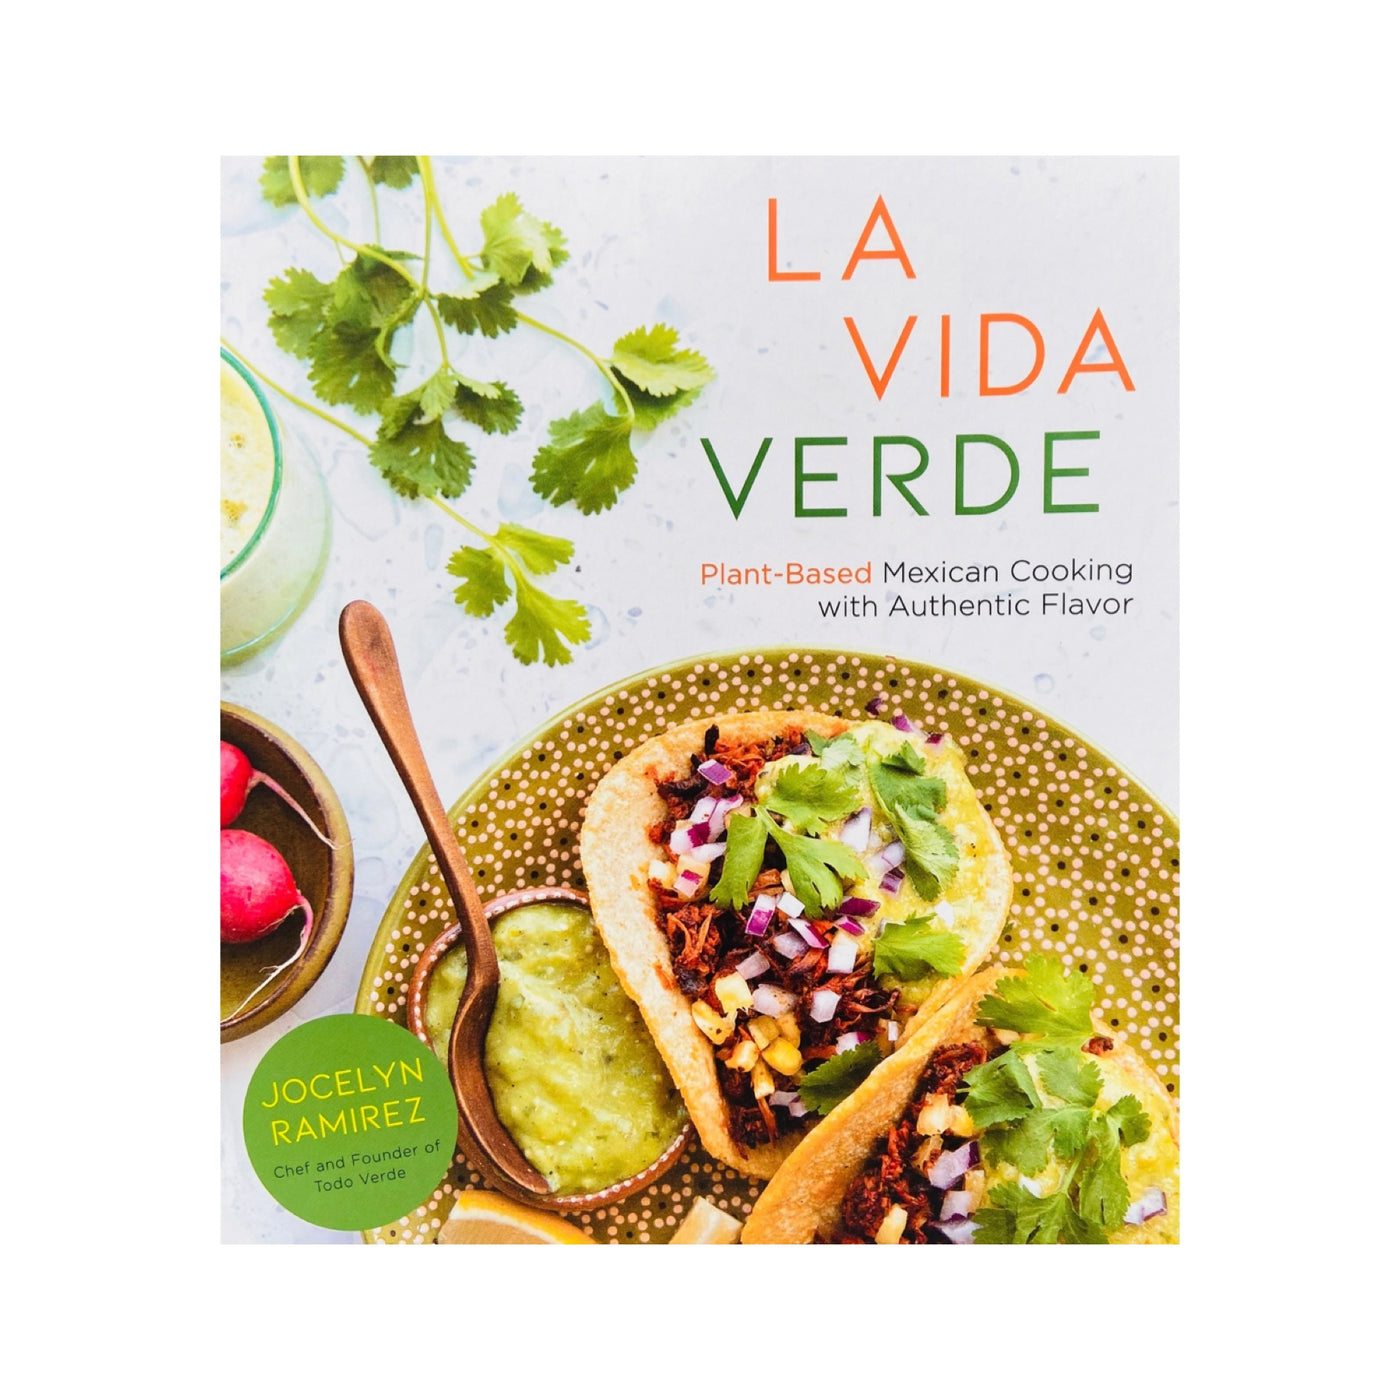 Front cover of La Vida Verde: Plant-Based Mexican Cooking with Authentic Flavor cookbook by Jocelyn Ramirez. Cover art features tacos on a green floral plate served with condiments (red onion, cilantro, radishes, salsa). 